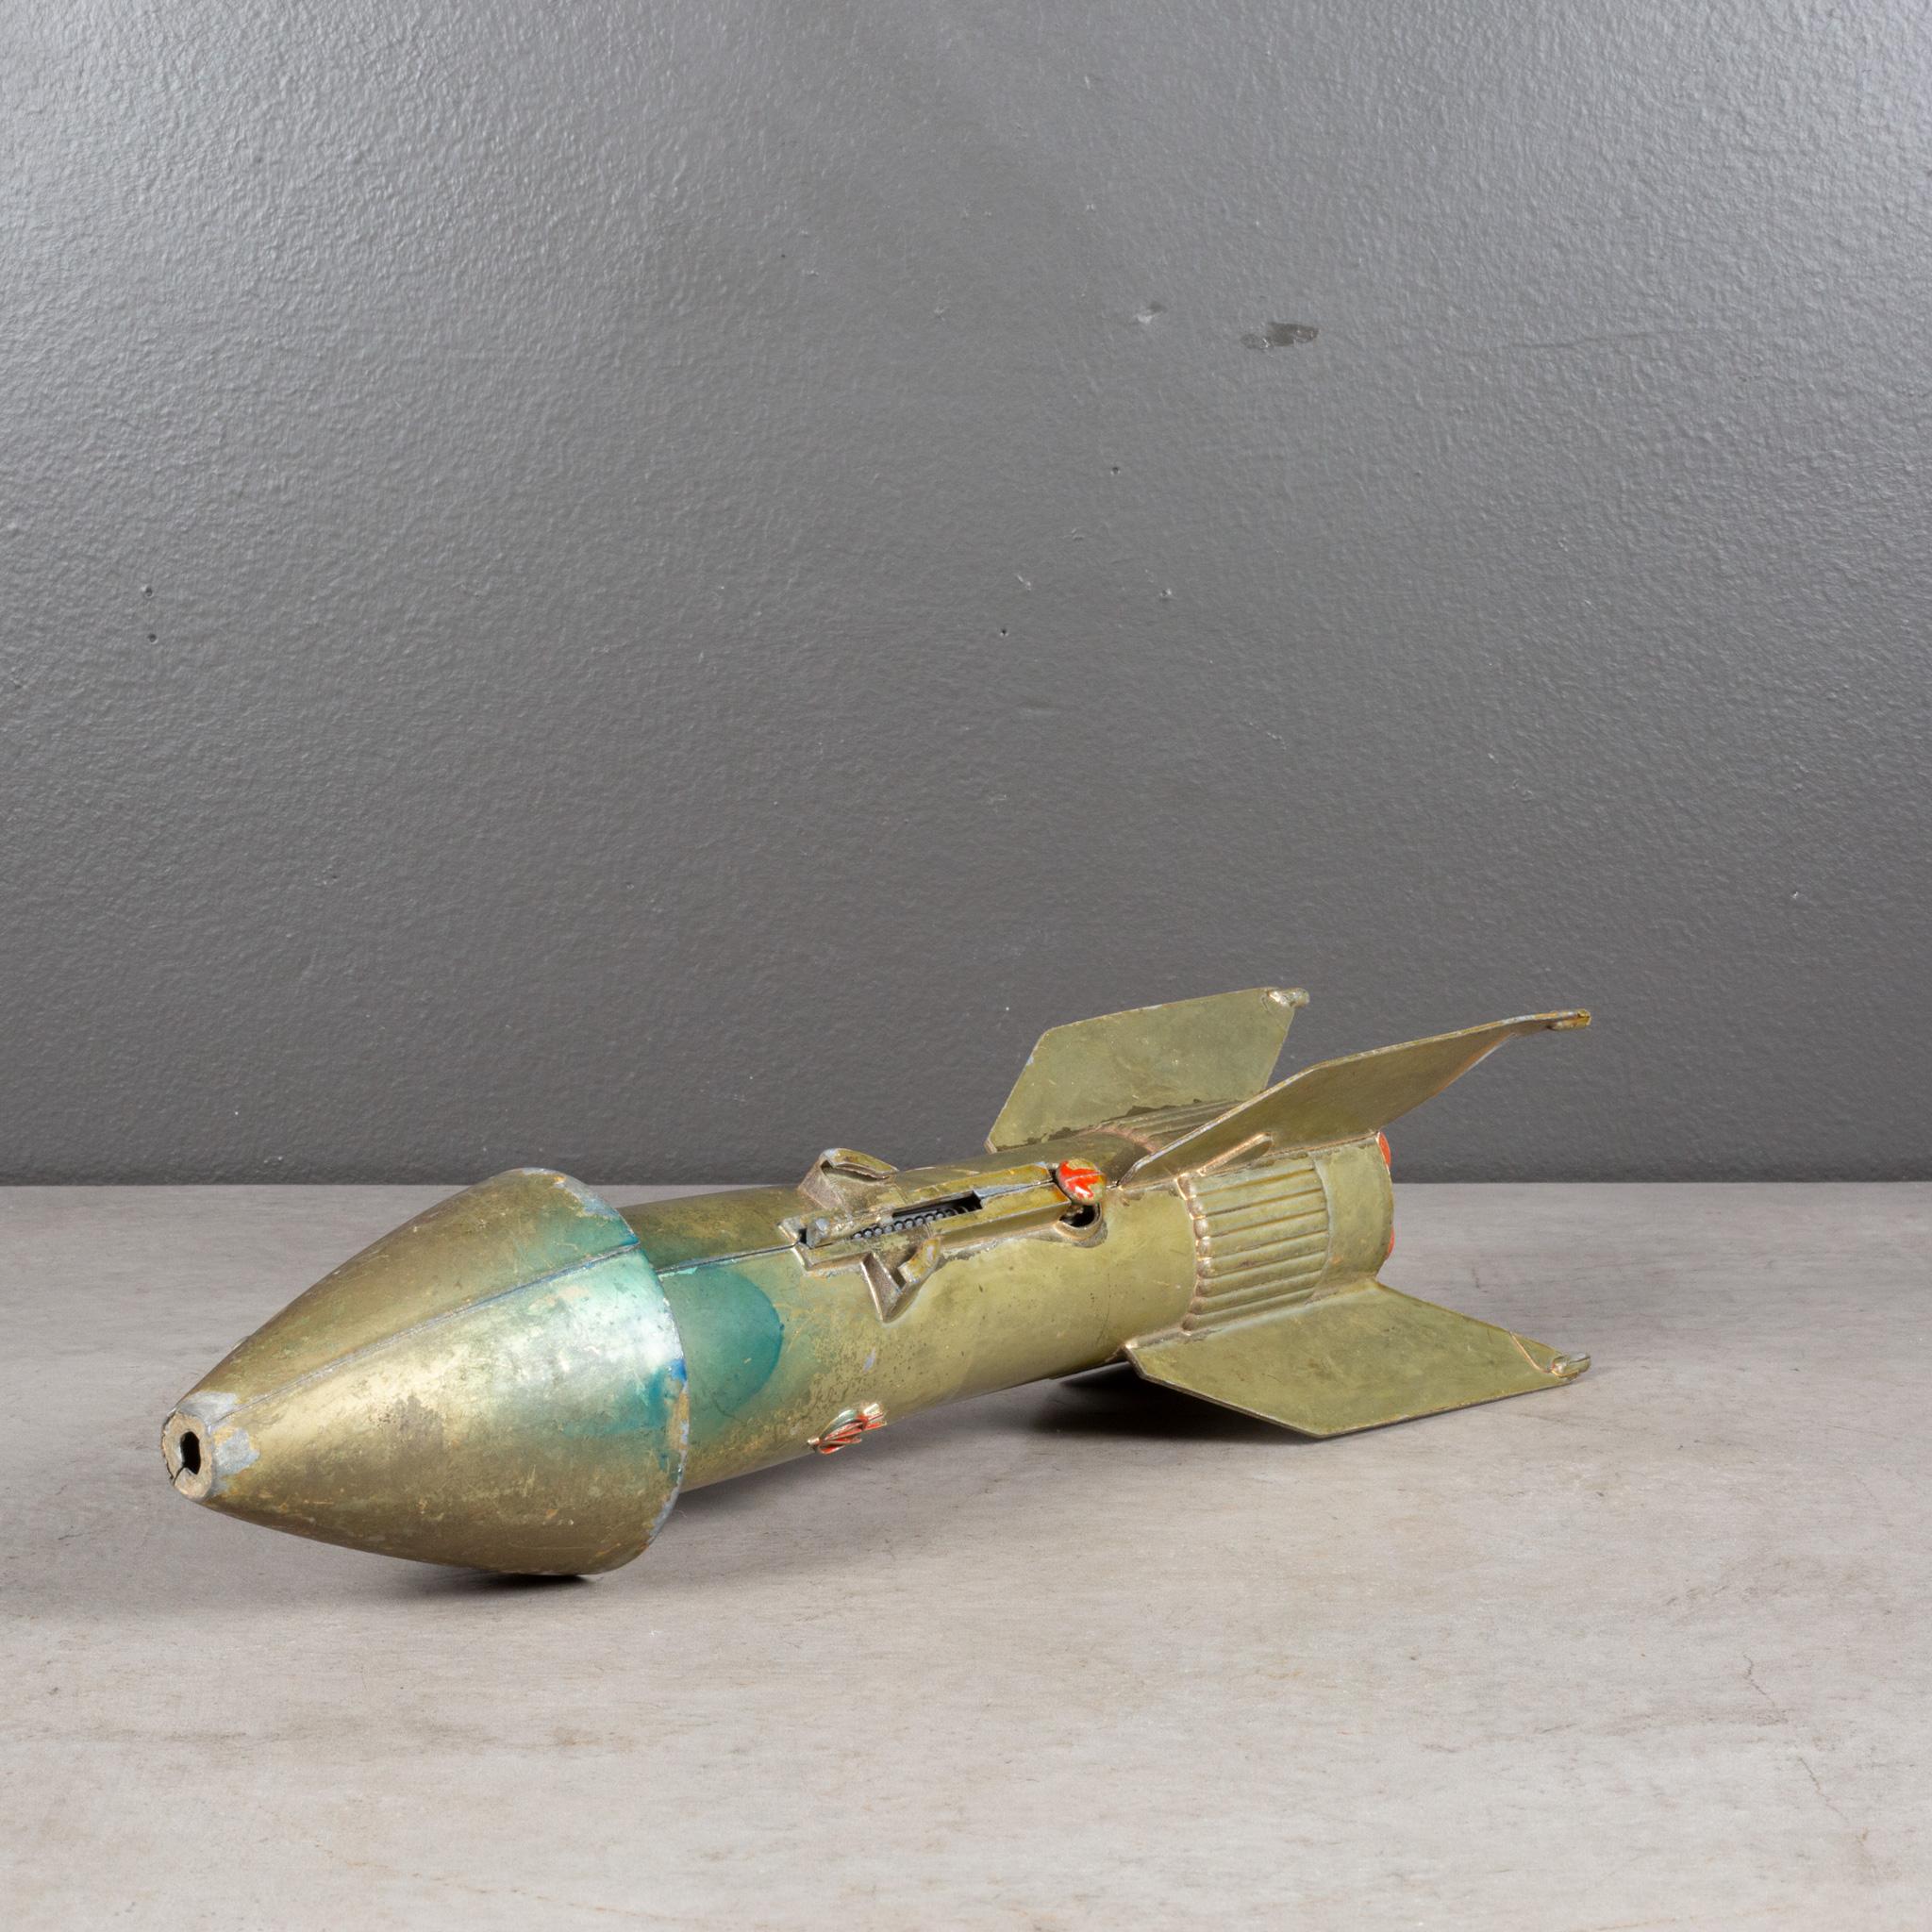 Vintage Astro Rocket Ship Savings Bank c.1957  (FREE SHIPPING) In Good Condition For Sale In San Francisco, CA